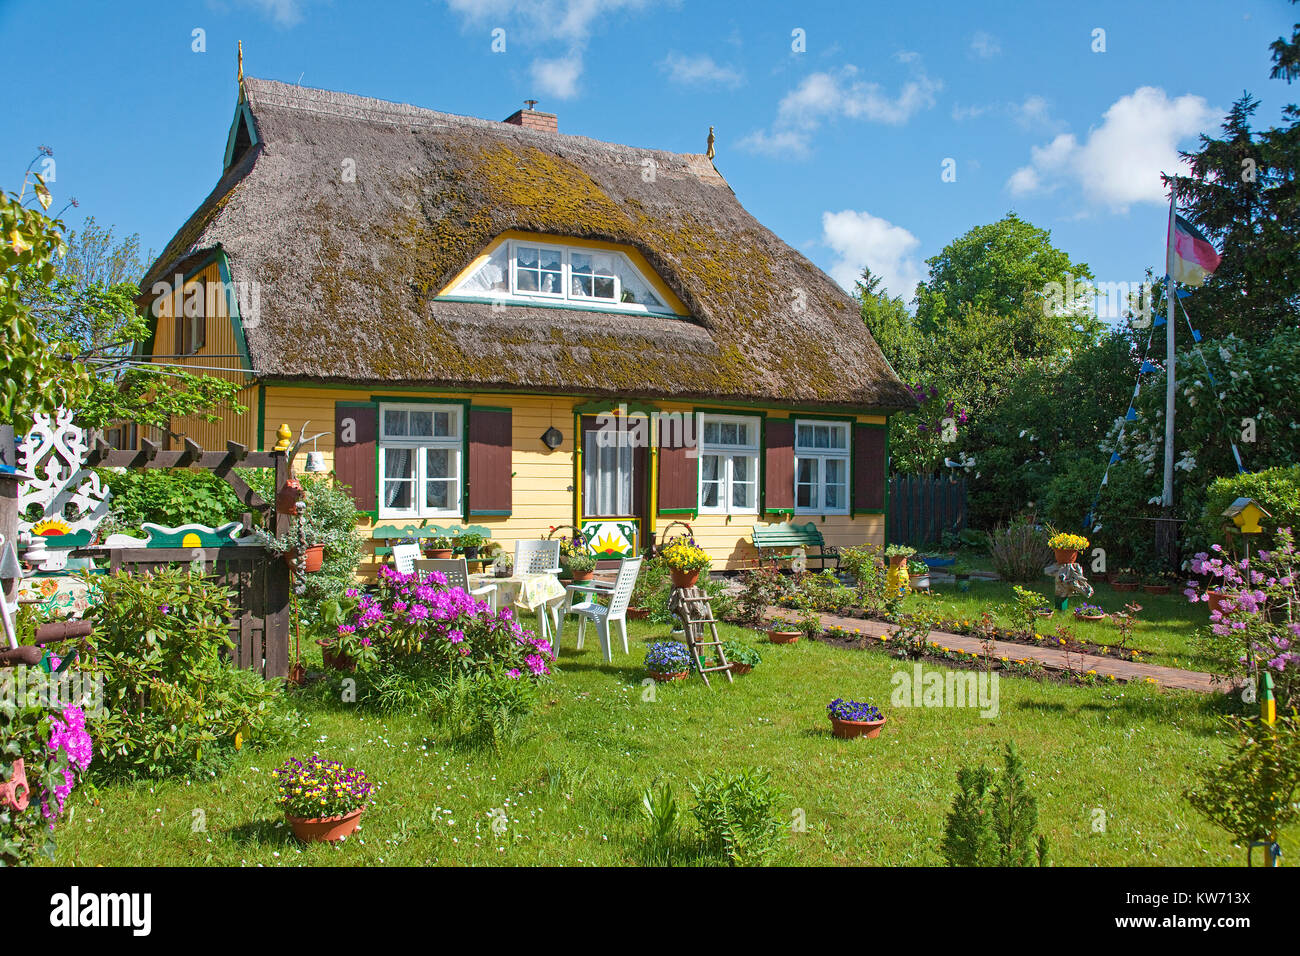 Traditional thatched-roof house at the village Born at Darss, Fischland, Mecklenburg-Western Pomerania, Baltic sea, Germany, Europe Stock Photo